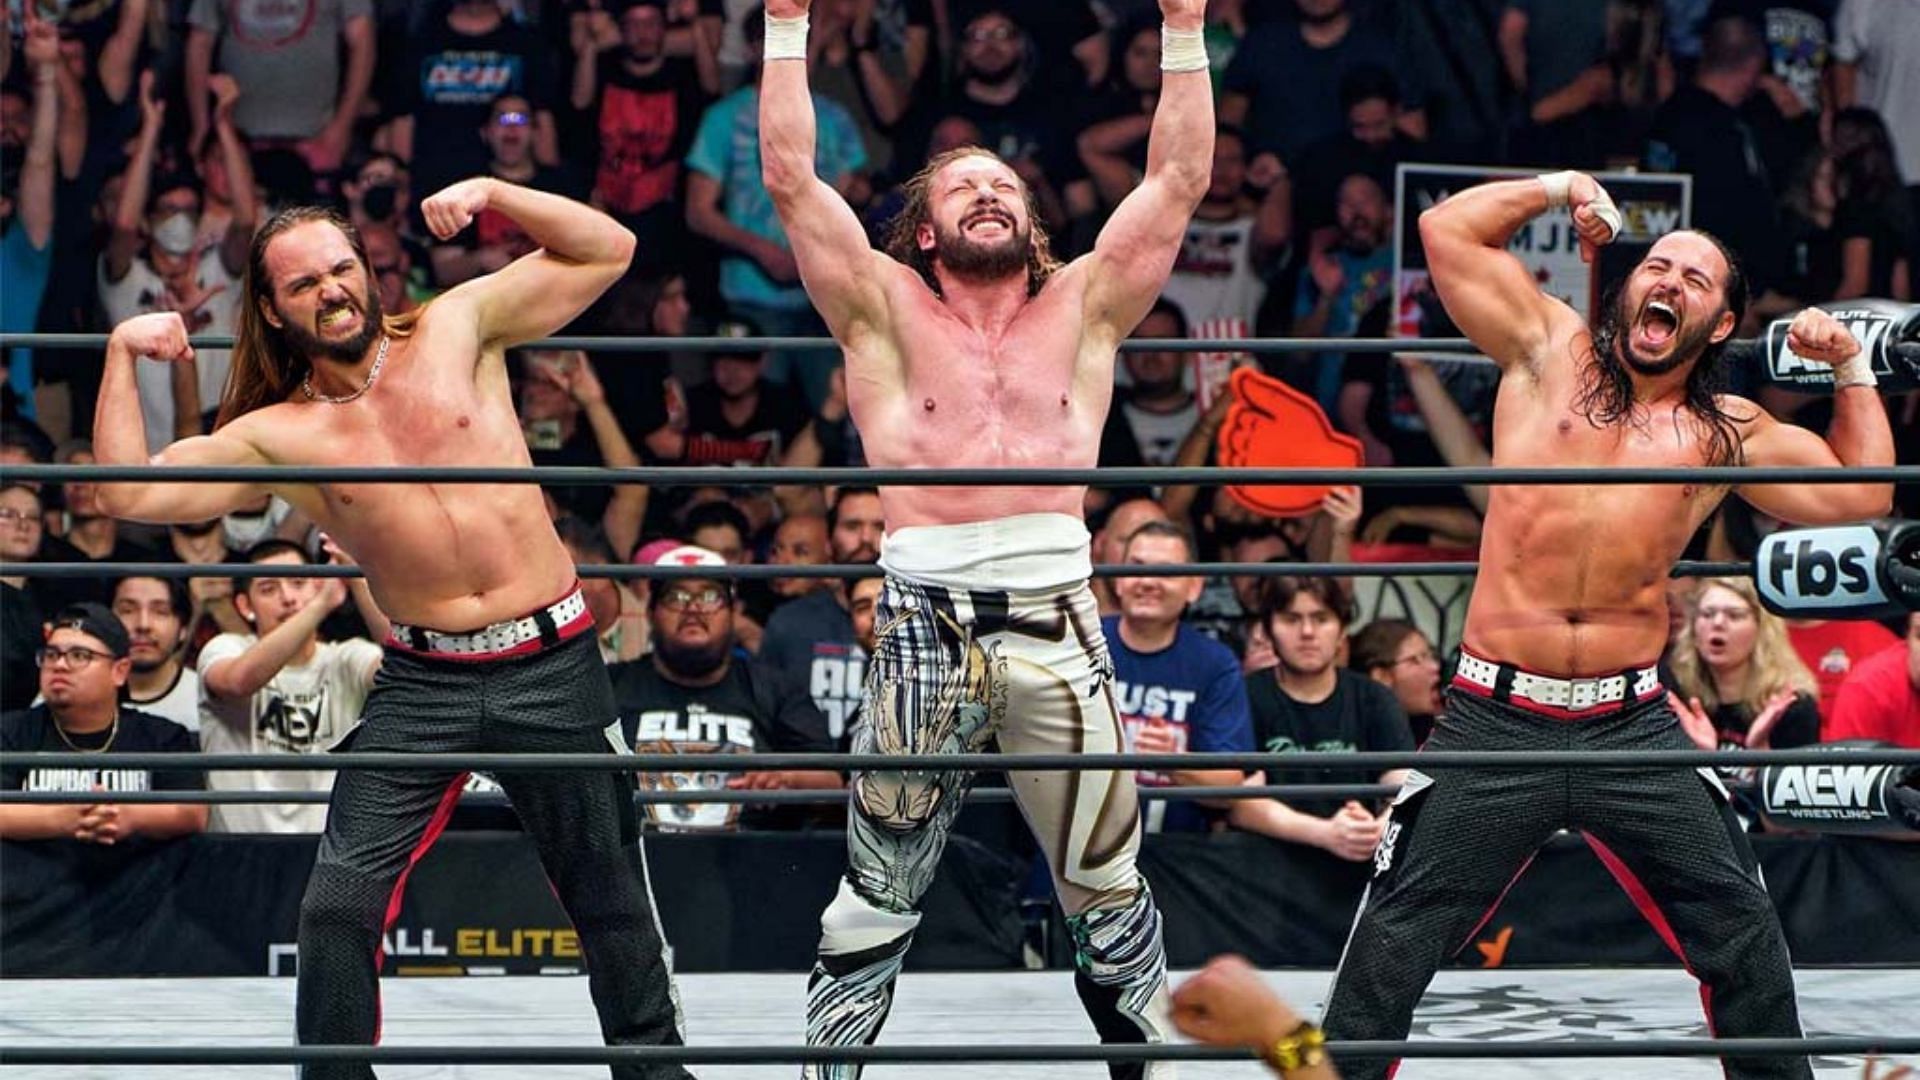 The Young Bucks and Kenny Omega will return to action on AEW.